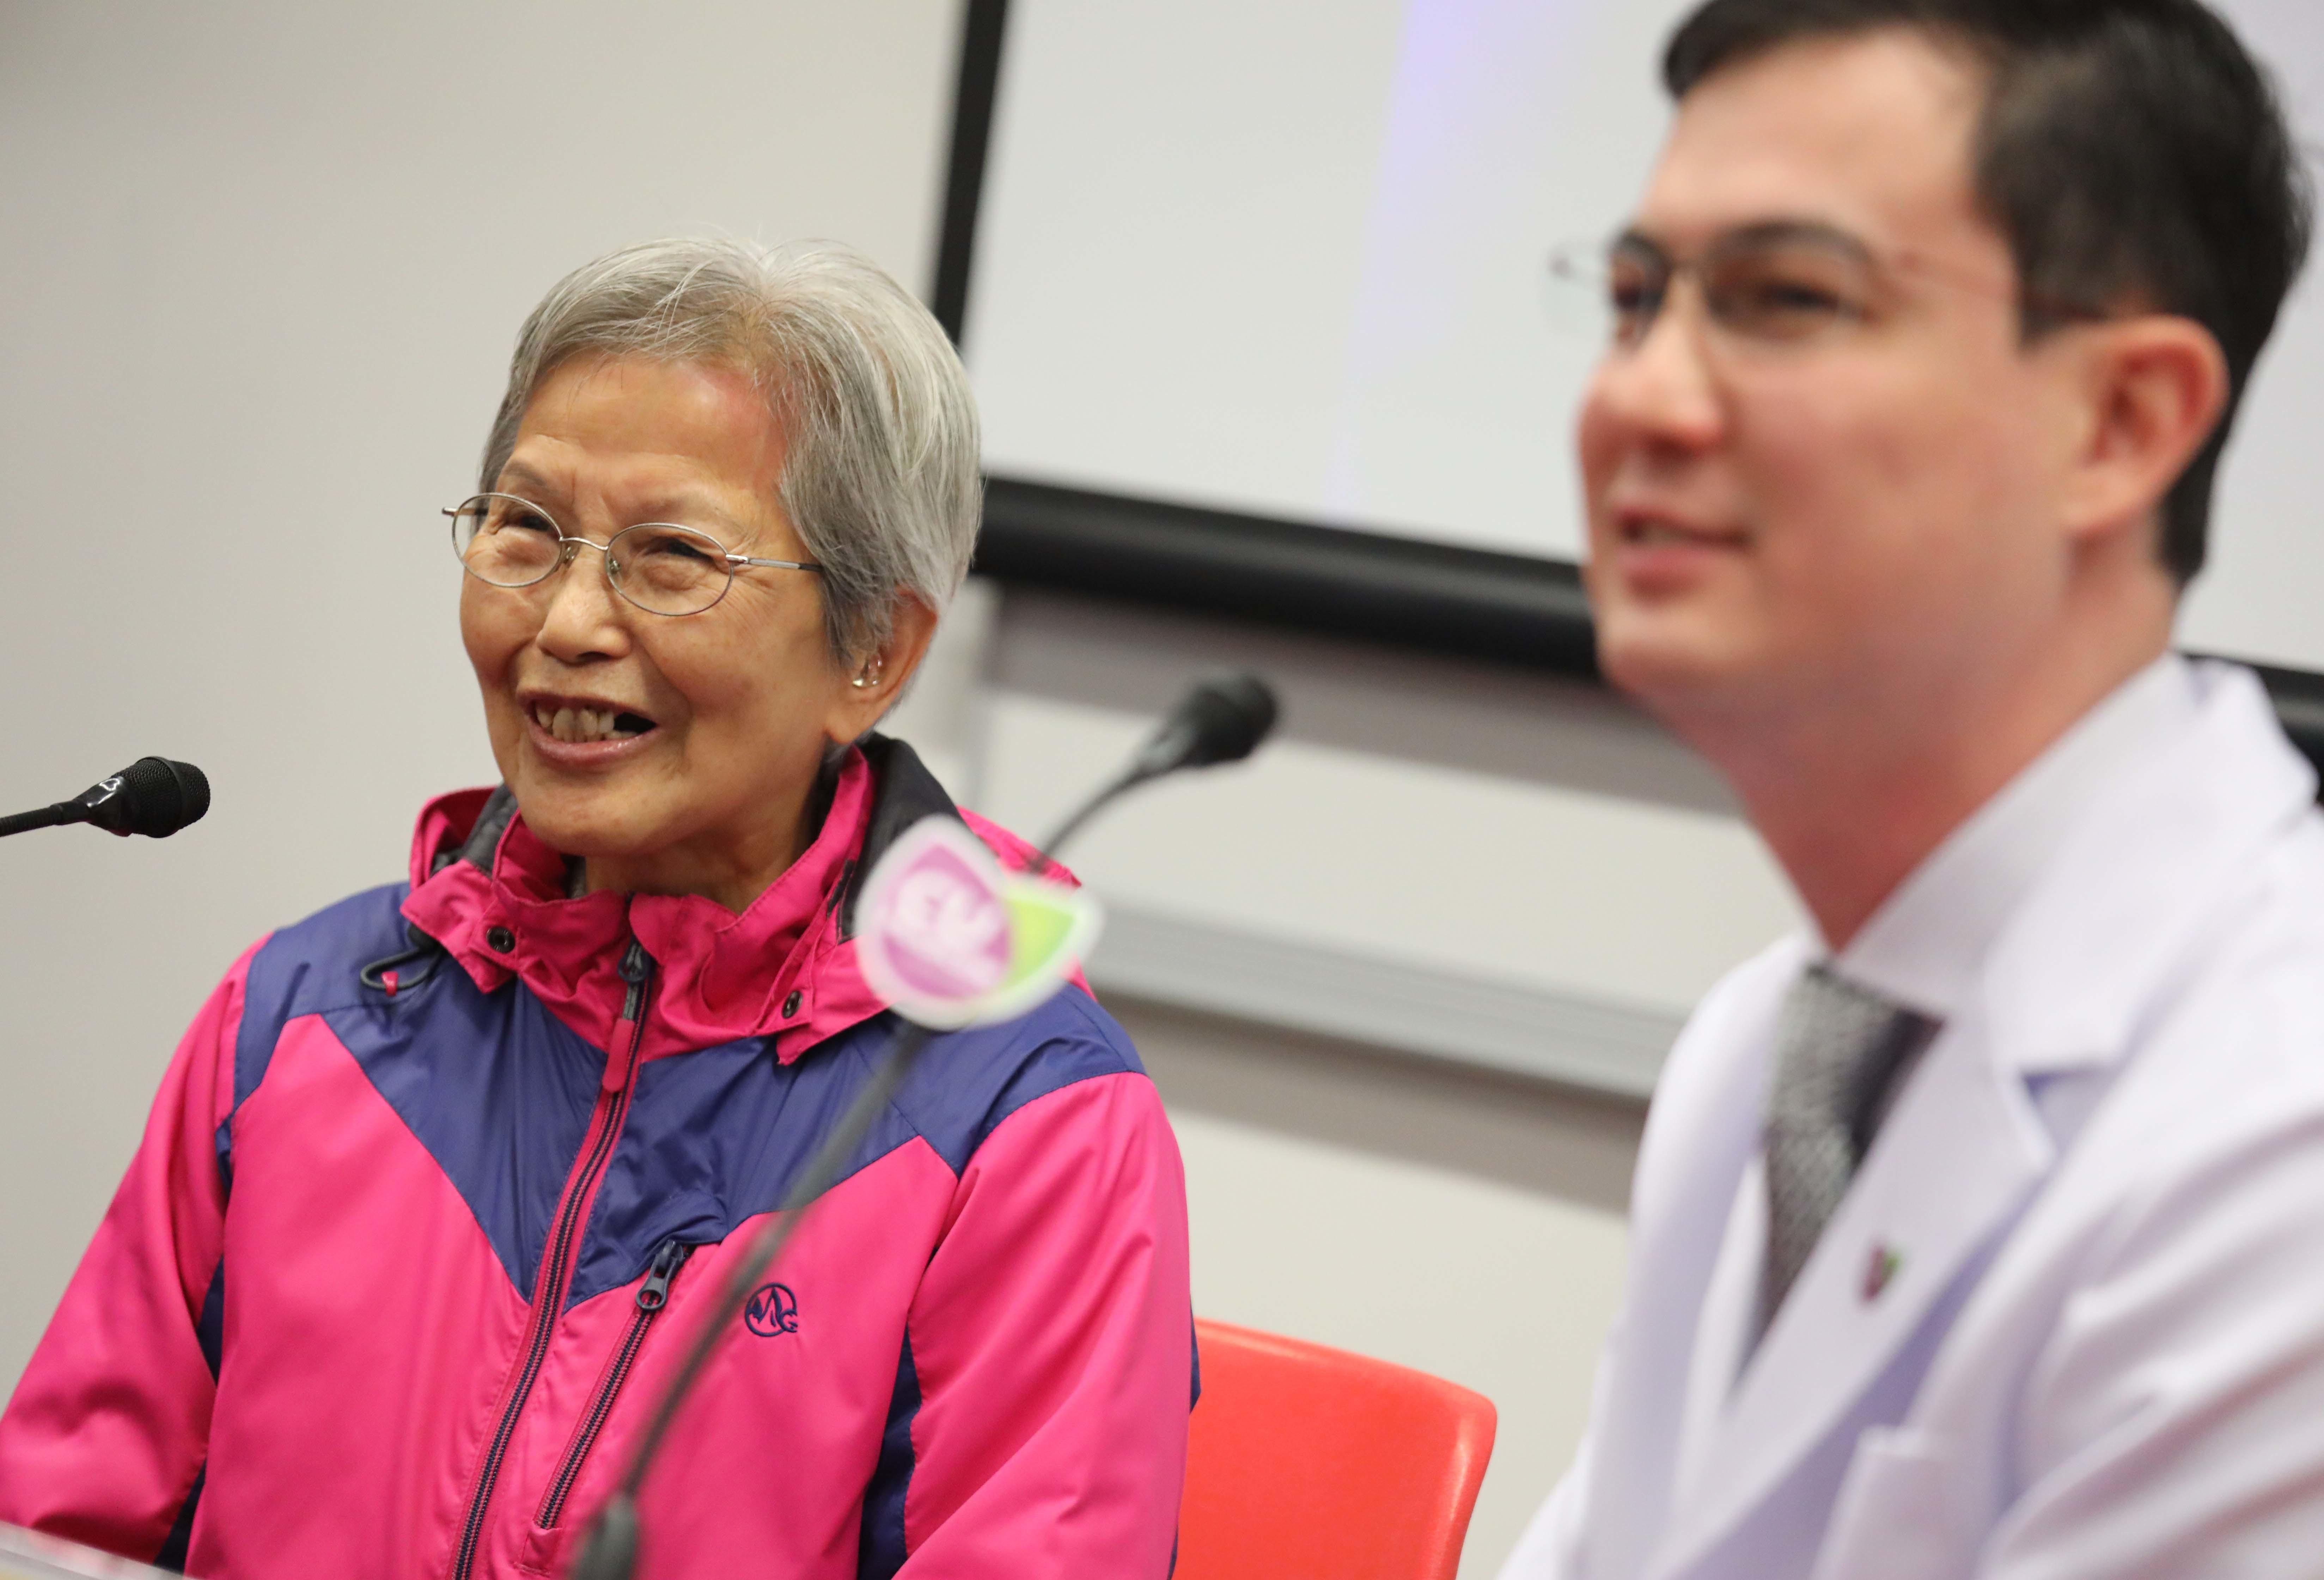 Ms. Cheng (left) states that she could speak naturally after receiving the single-port robotic-assisted surgery to remove the tumor under her tongue.